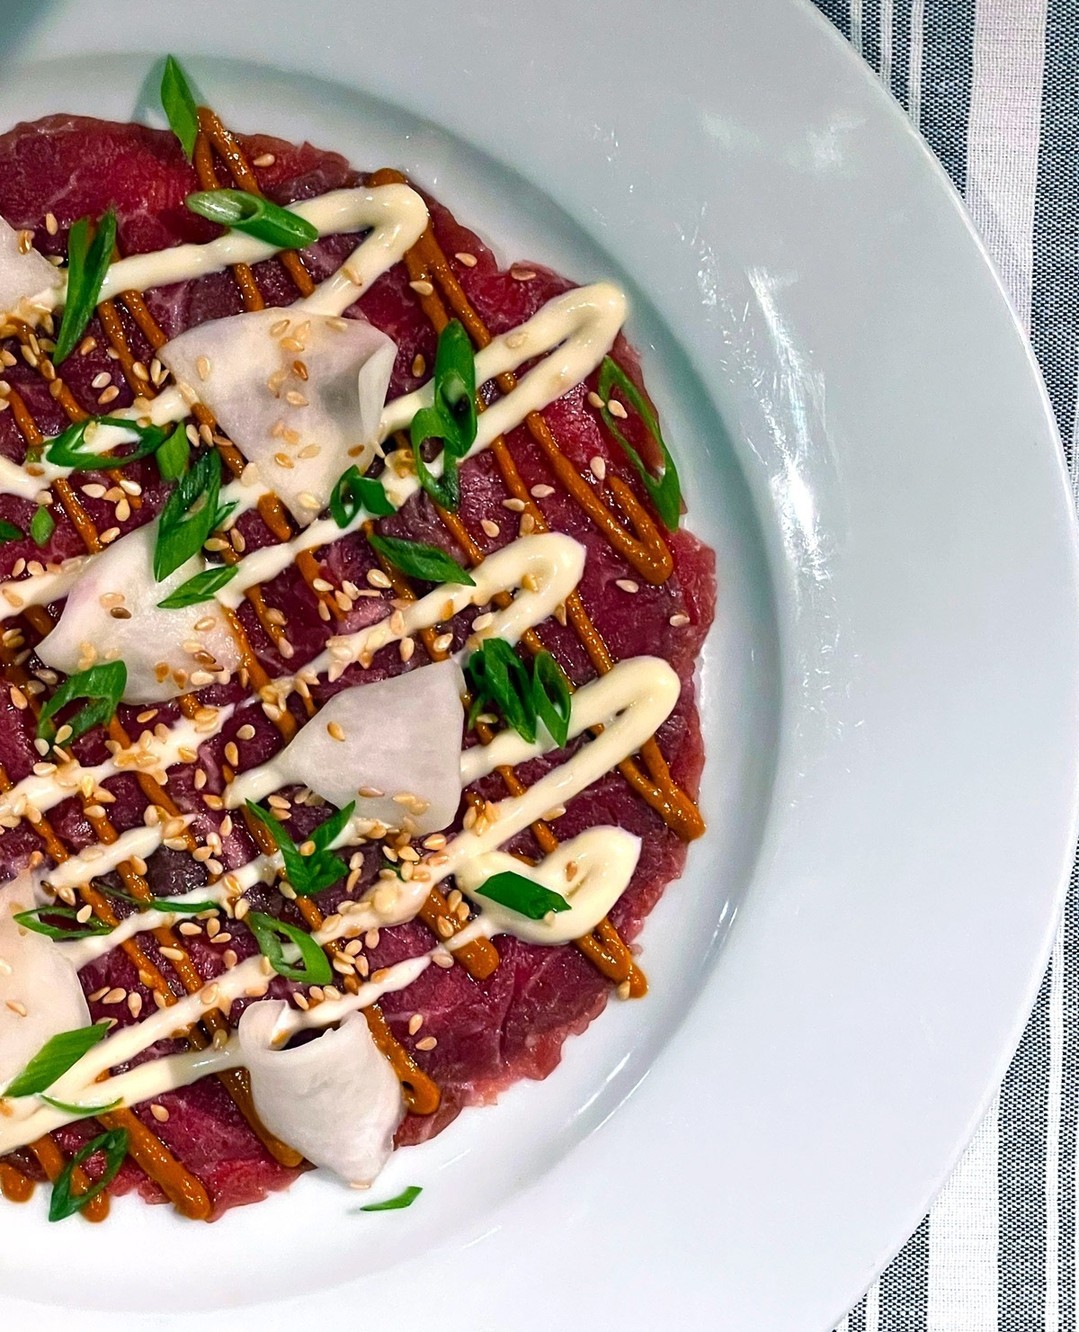 Our summer menu features cold plates for these incredibly hot days - like our Wagyu Beef Carpaccio. Served with sesame, salted turnips, scallion, kimchi vinaigrette, and aioli and paired with a cold cocktail of your choosing. ⁠
.⁠
.⁠
.⁠
#wagyu #carpaccio #eatlocal #southofbroad #explorecharleston #charleston #foodporn #chseats